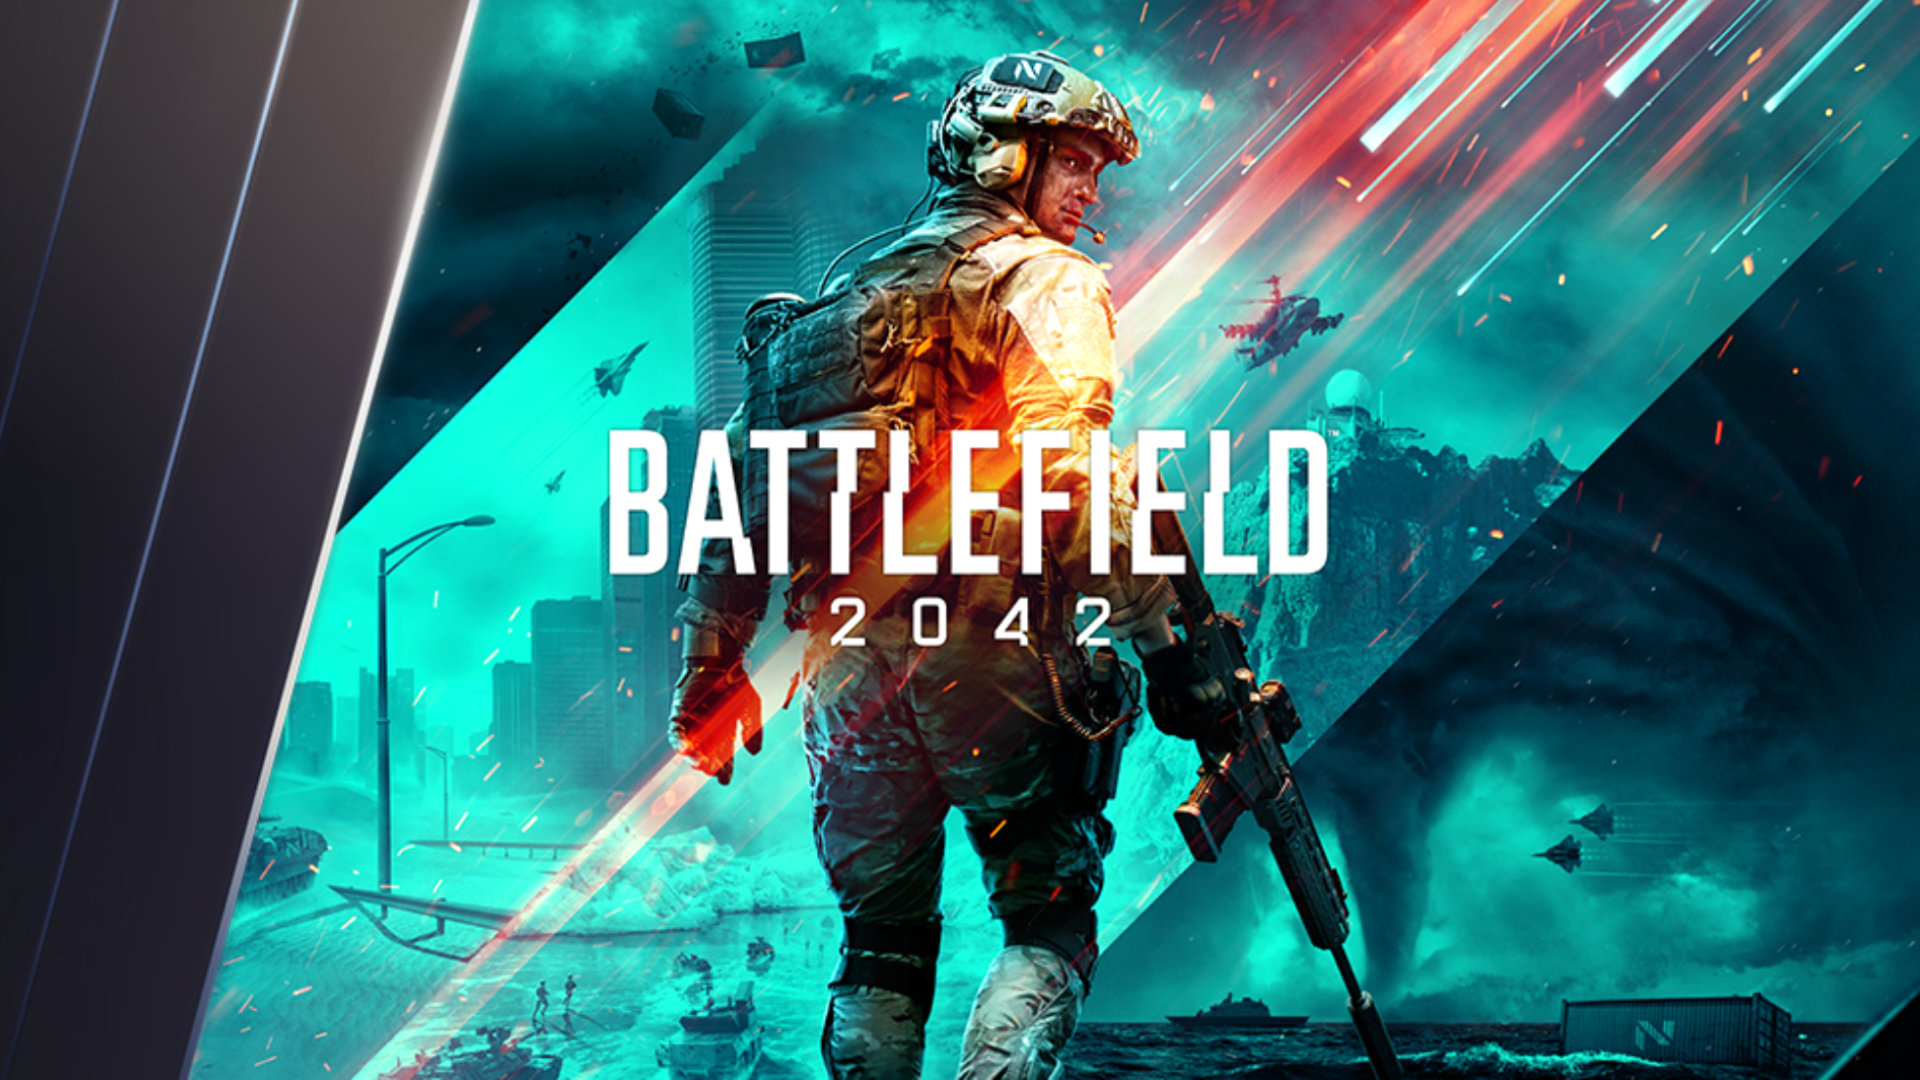 Get Battlefield 2042 free with Nvidia RTX 3000 gaming PCs and laptops